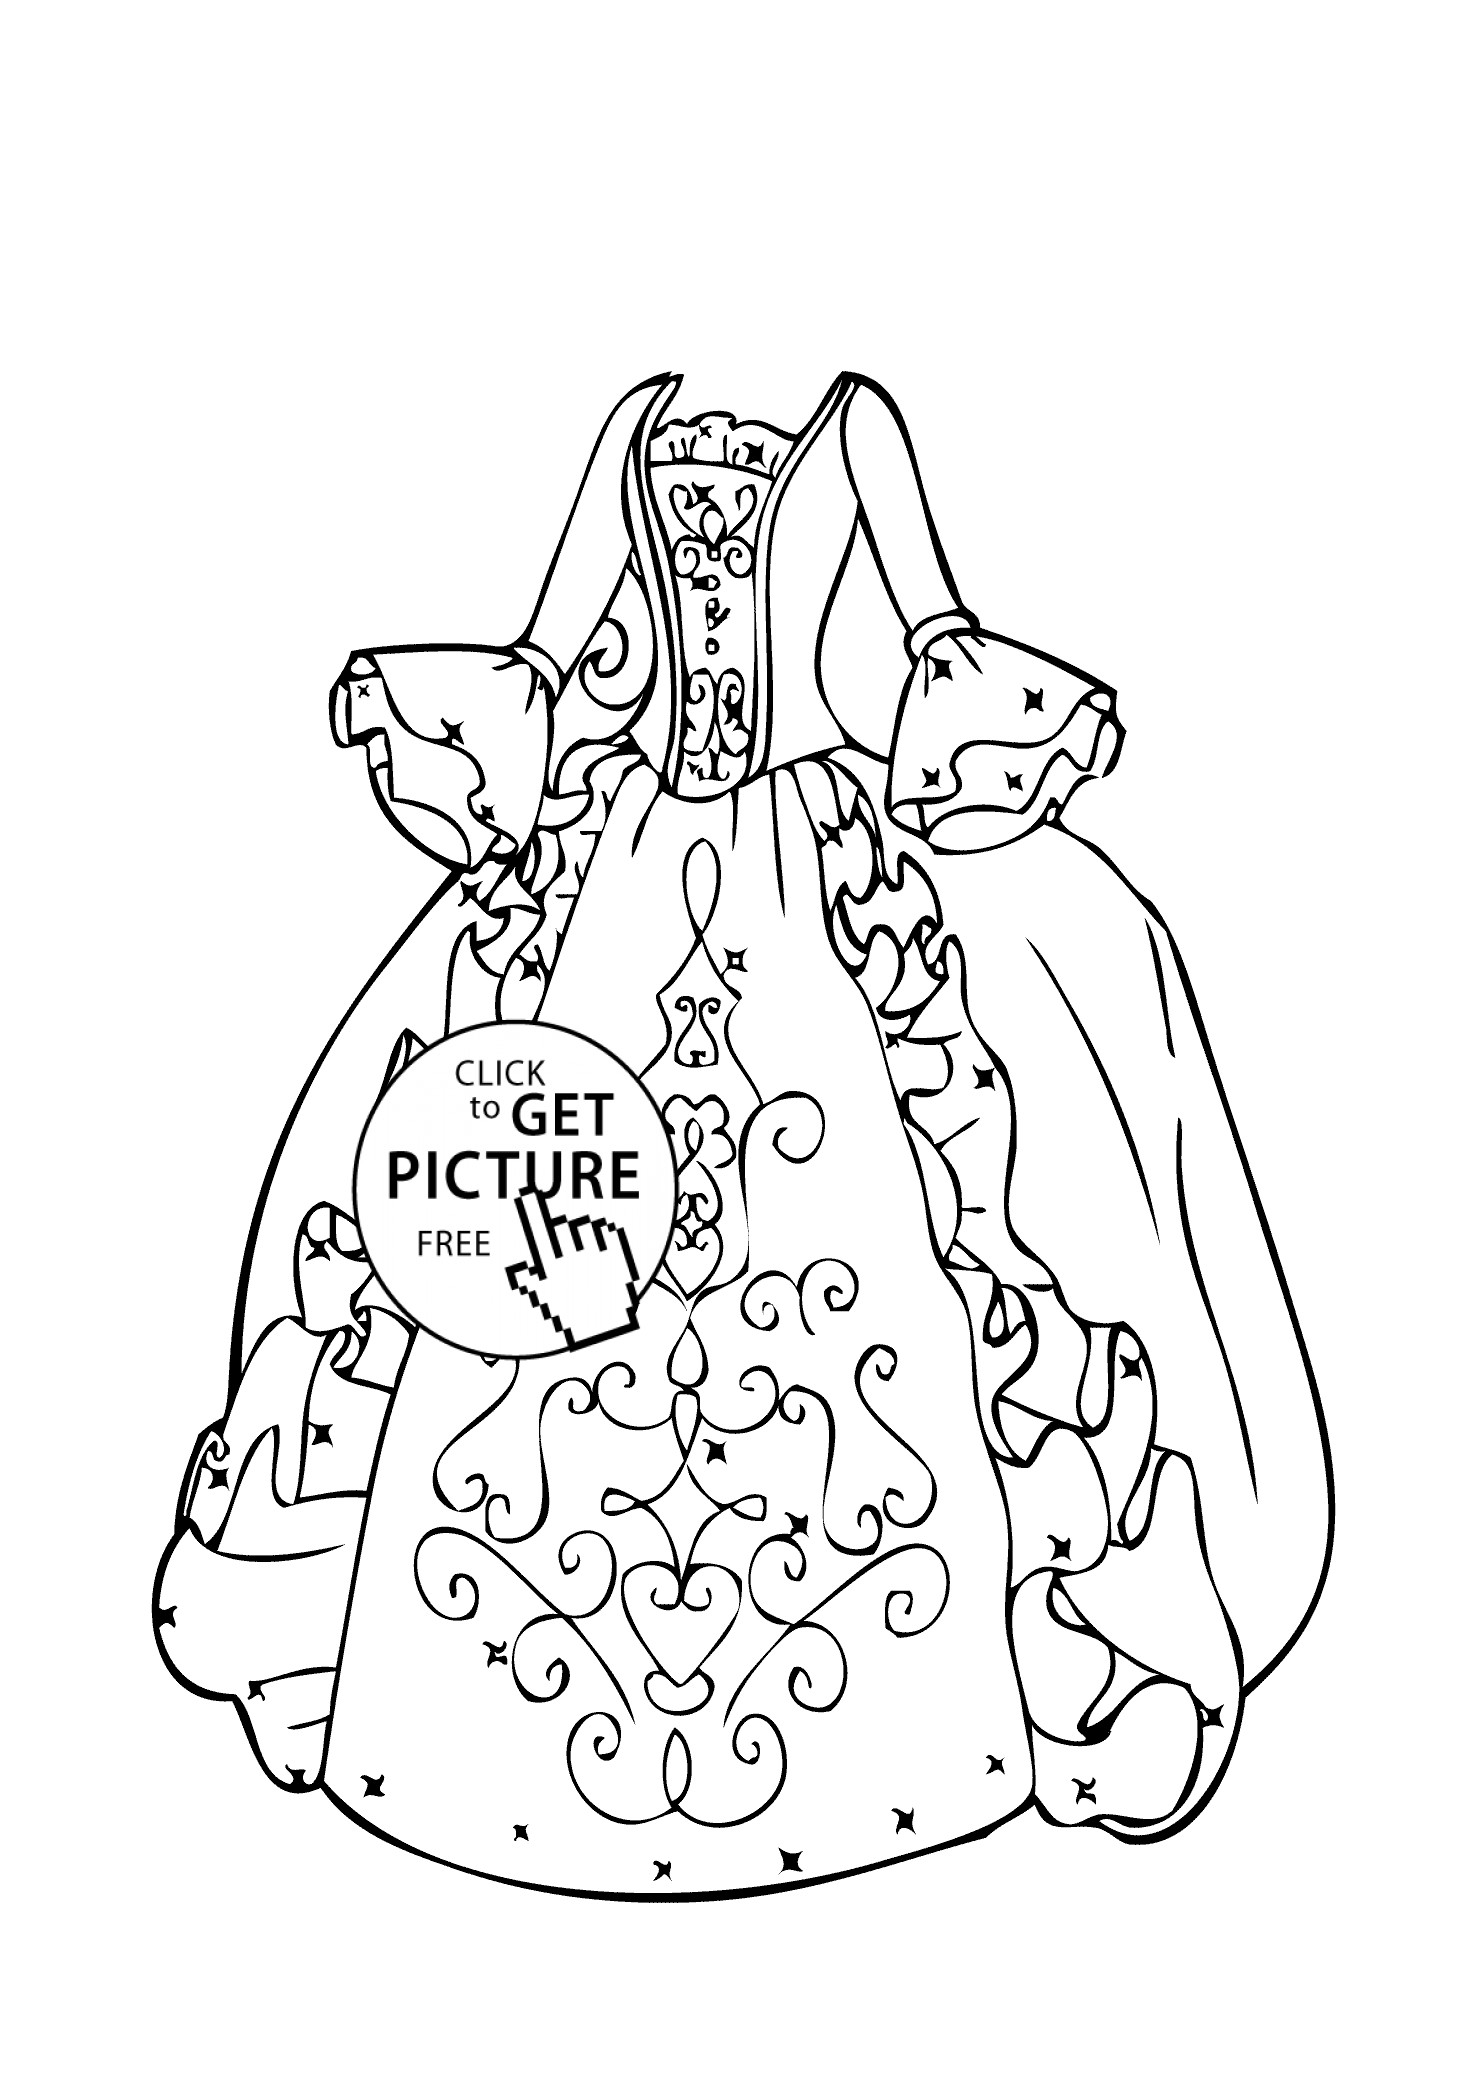 Coloring Sheets For Girls Size Big
 Ball gown coloring page for girls printable free